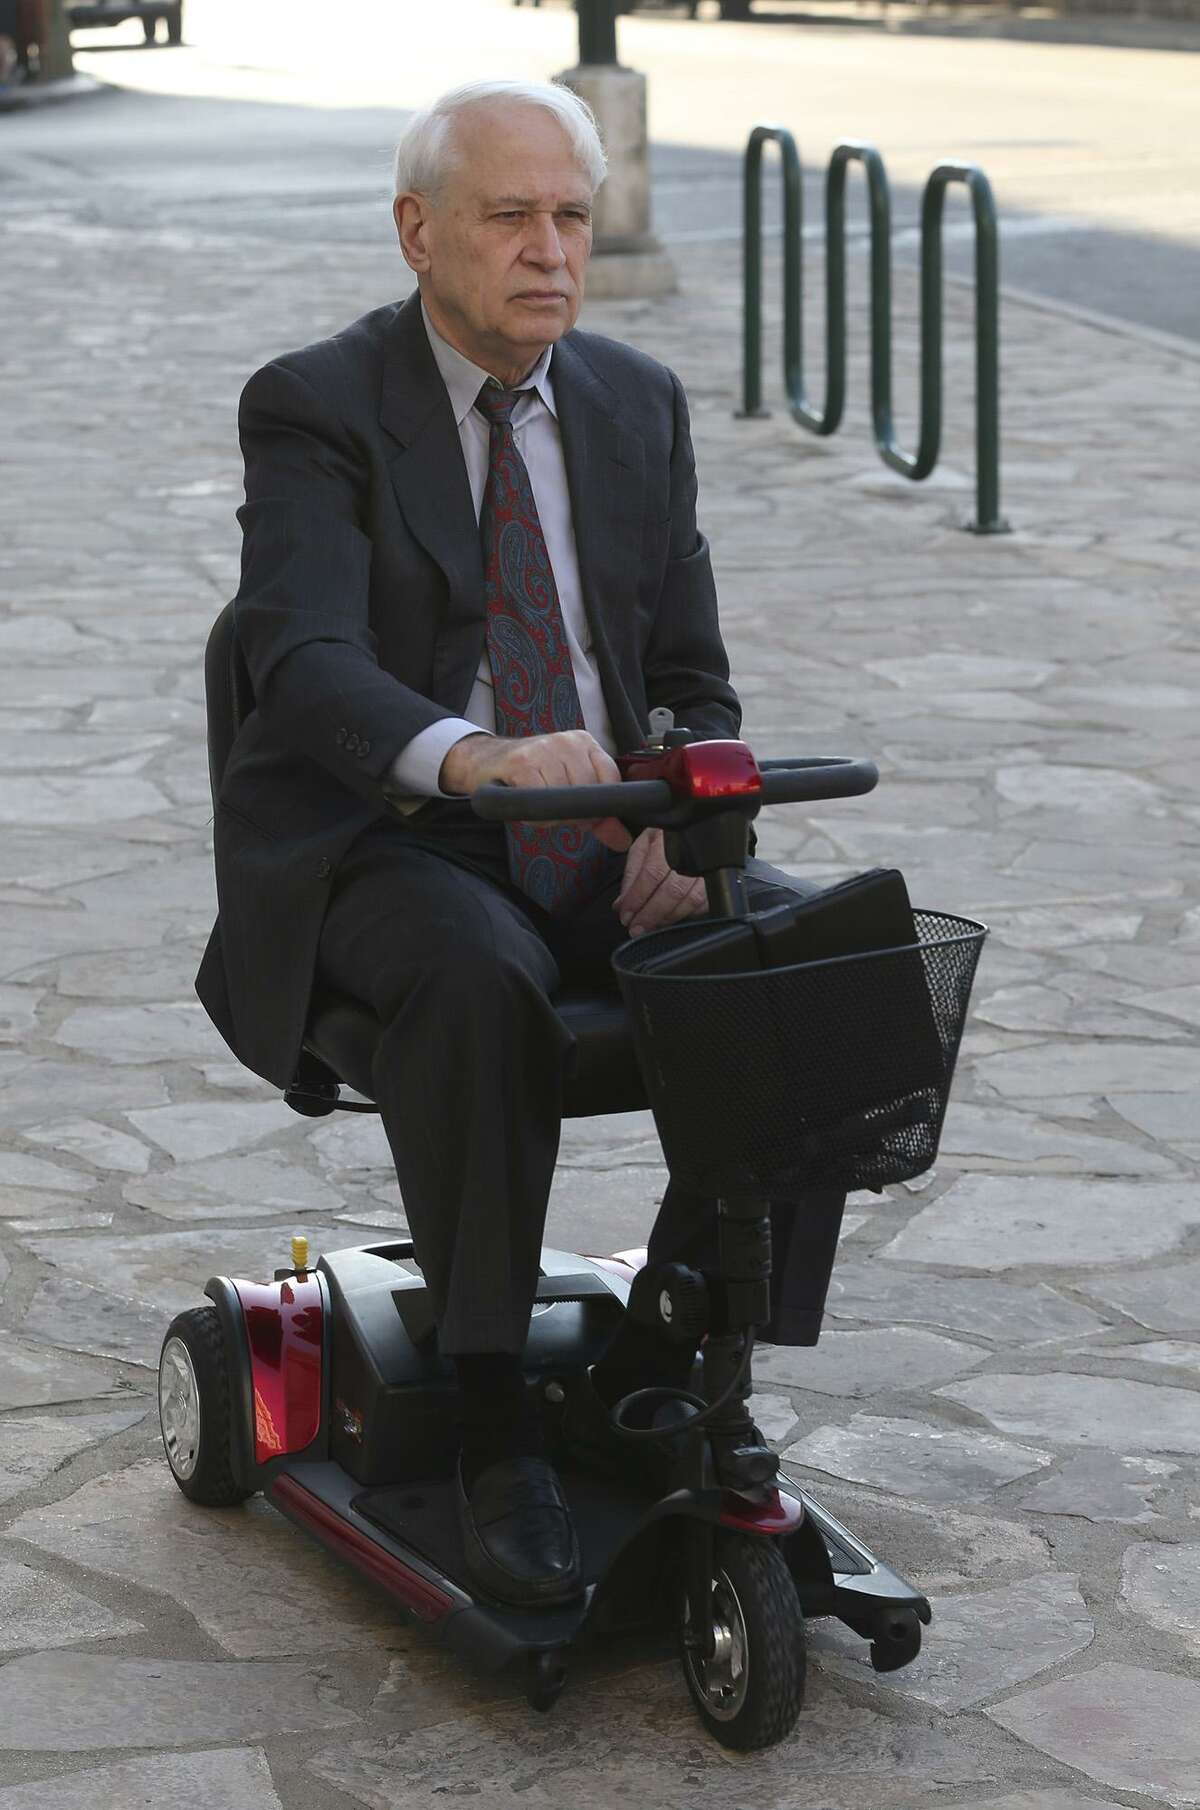 A bankruptcy judge ruled this week that a payment made to Dr. David Zehr by FourWinds Logistics was a “fraudulent transfer.” The ruling opens the door for the bankruptcy trustee to move to collect the money from Zehr. The Dallas hand surgeon is seen here in this September photo during a bankruptcy court trial. He had been injured in a bicycle accident.